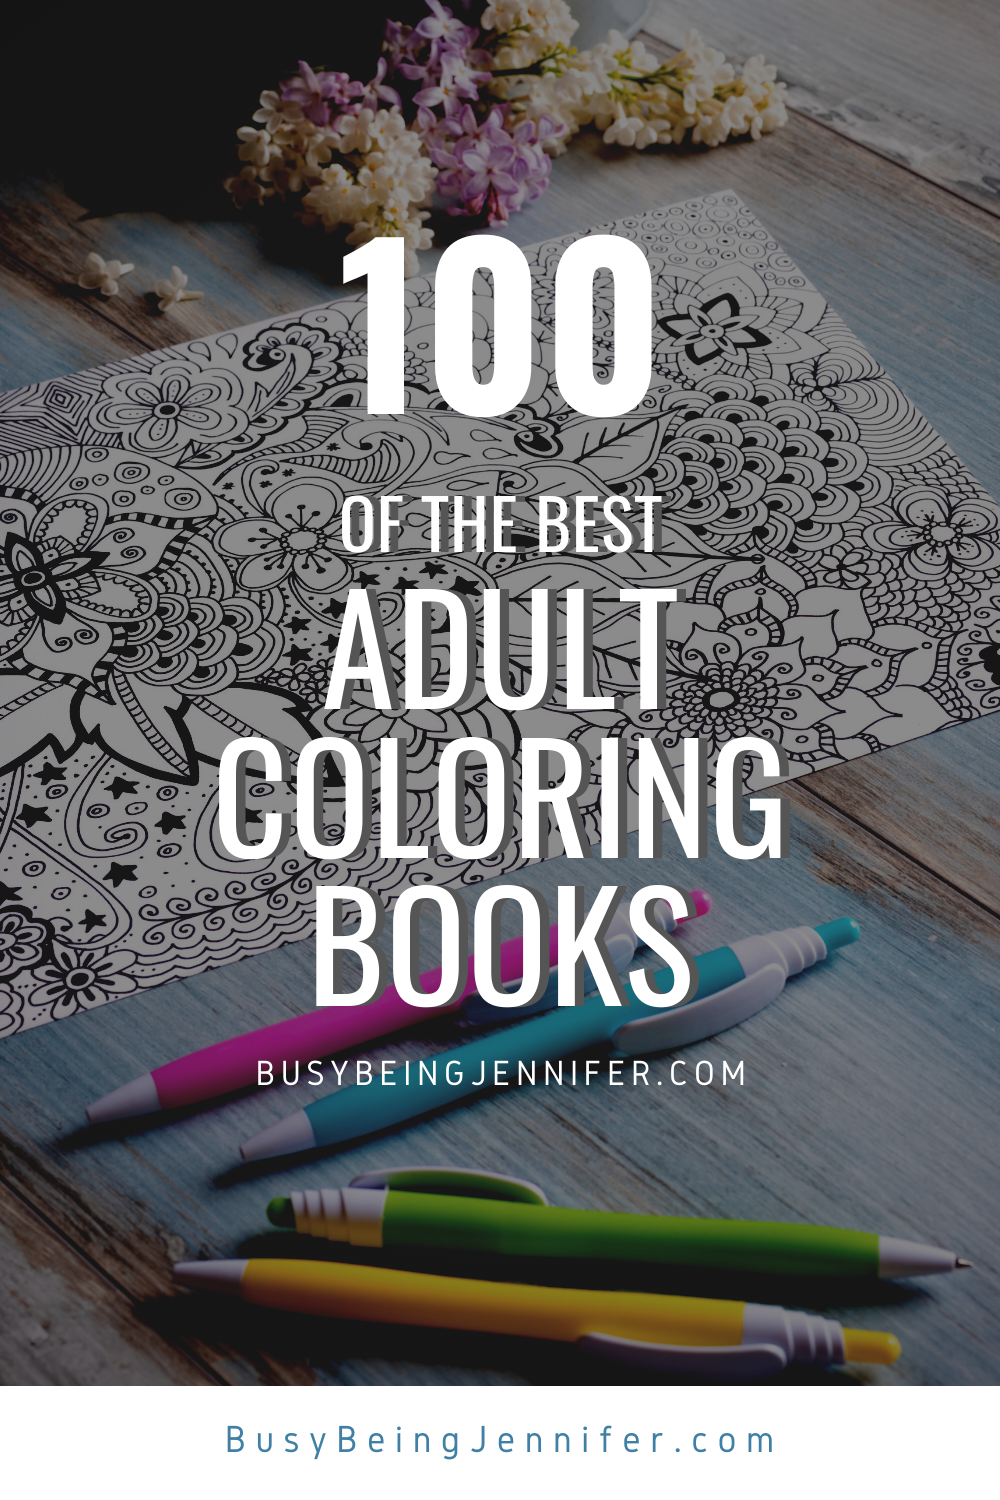 The Best Adult Coloring Books! - Busy Being Jennifer